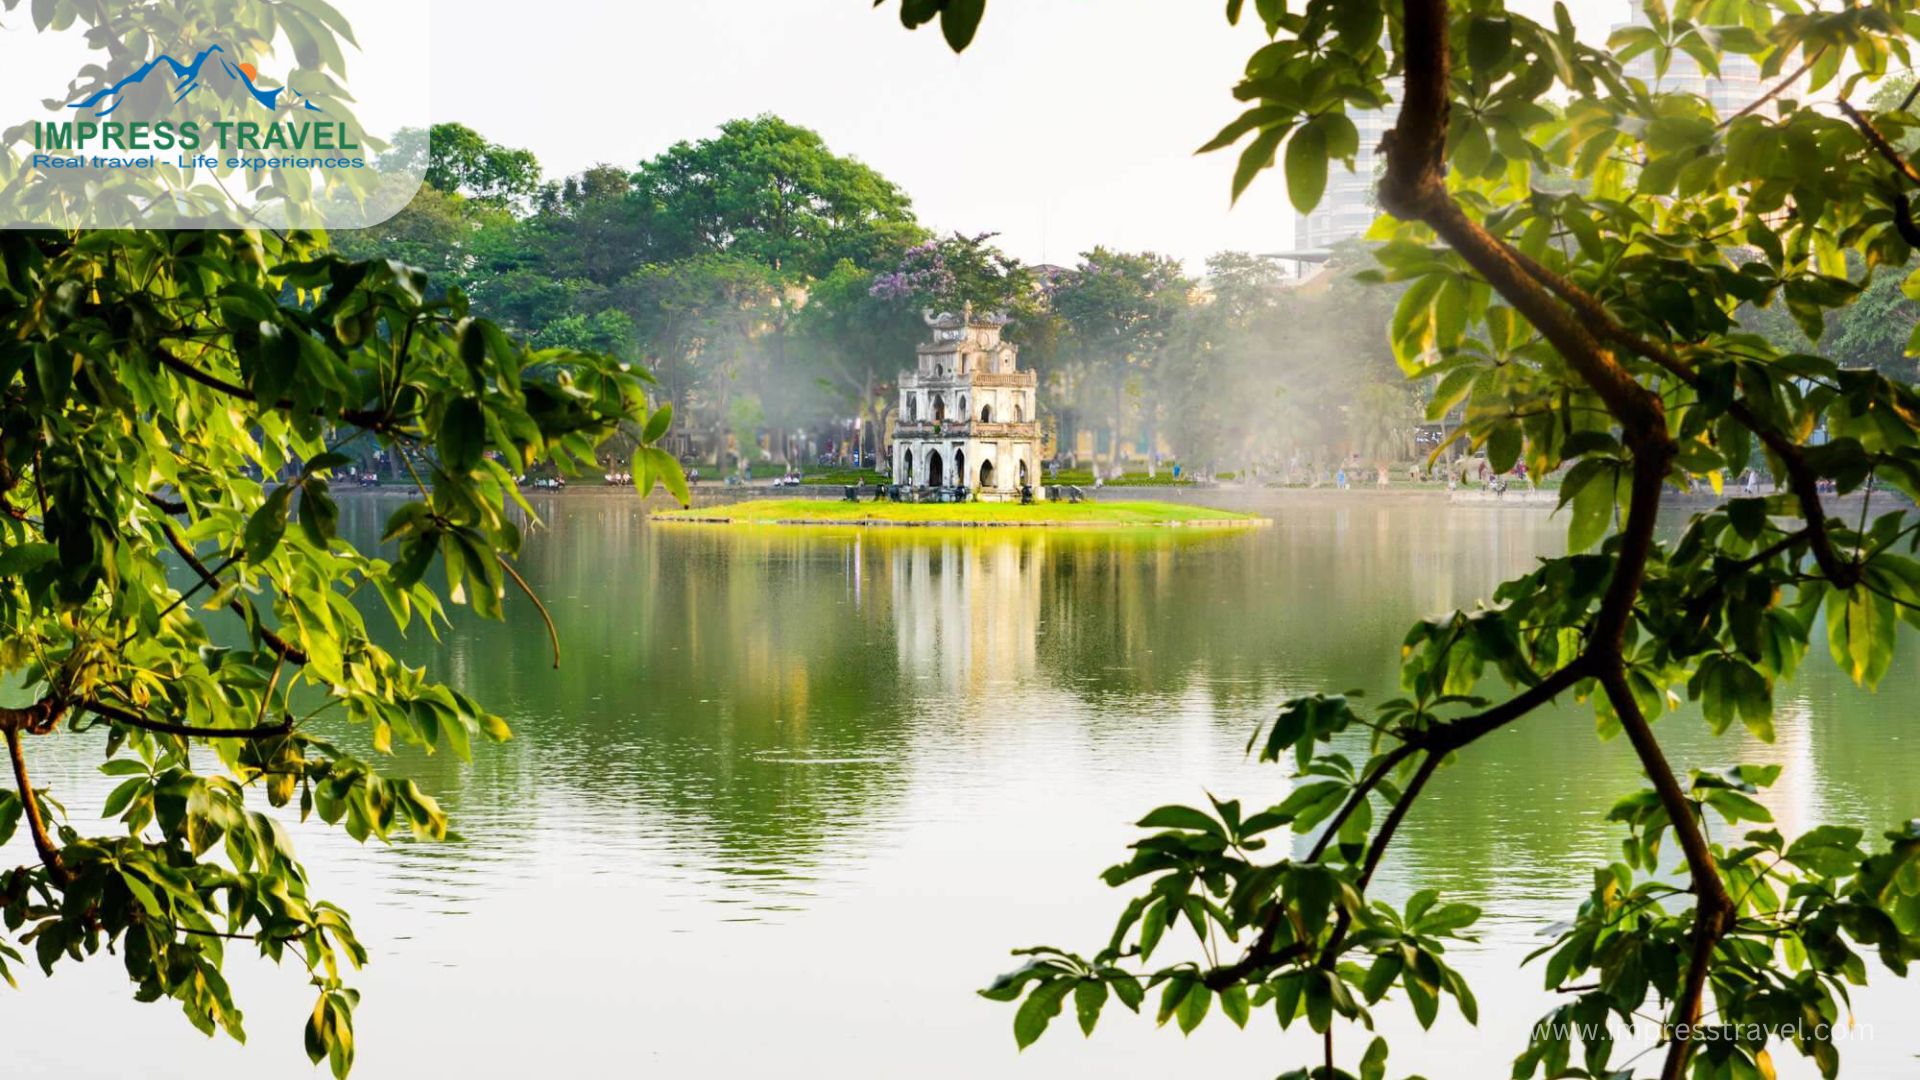 Hanoi location-The lake is adorned with the iconic red bridge leading to the Ngoc Son Temple, nestled on a small island. Visitors can enjoy leisurely walks around the lake, admire the scenic views, and learn about the legends surrounding the lake and its temple.